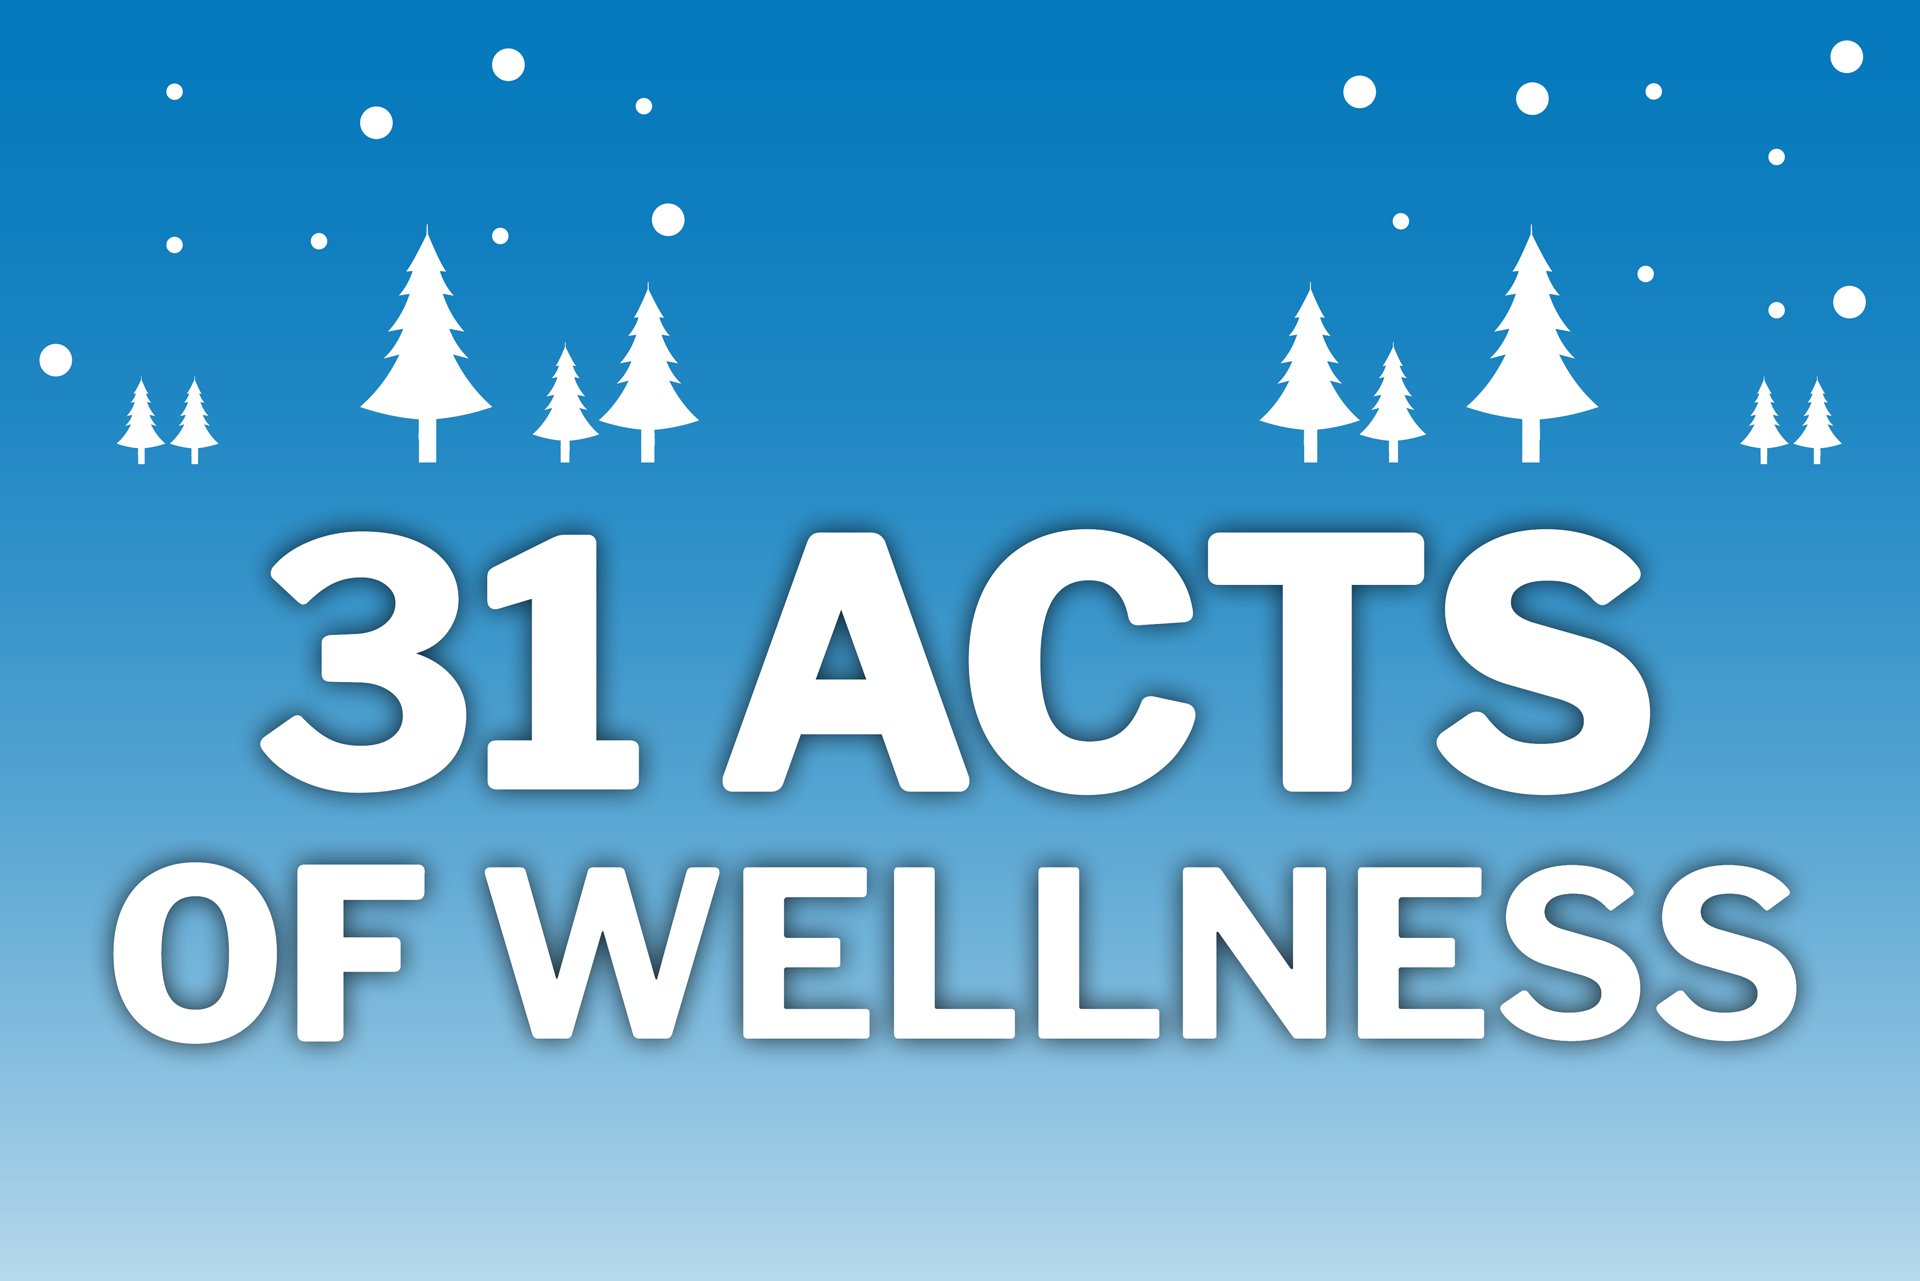 31 Acts of Wellness to Keep the Holidays Bright